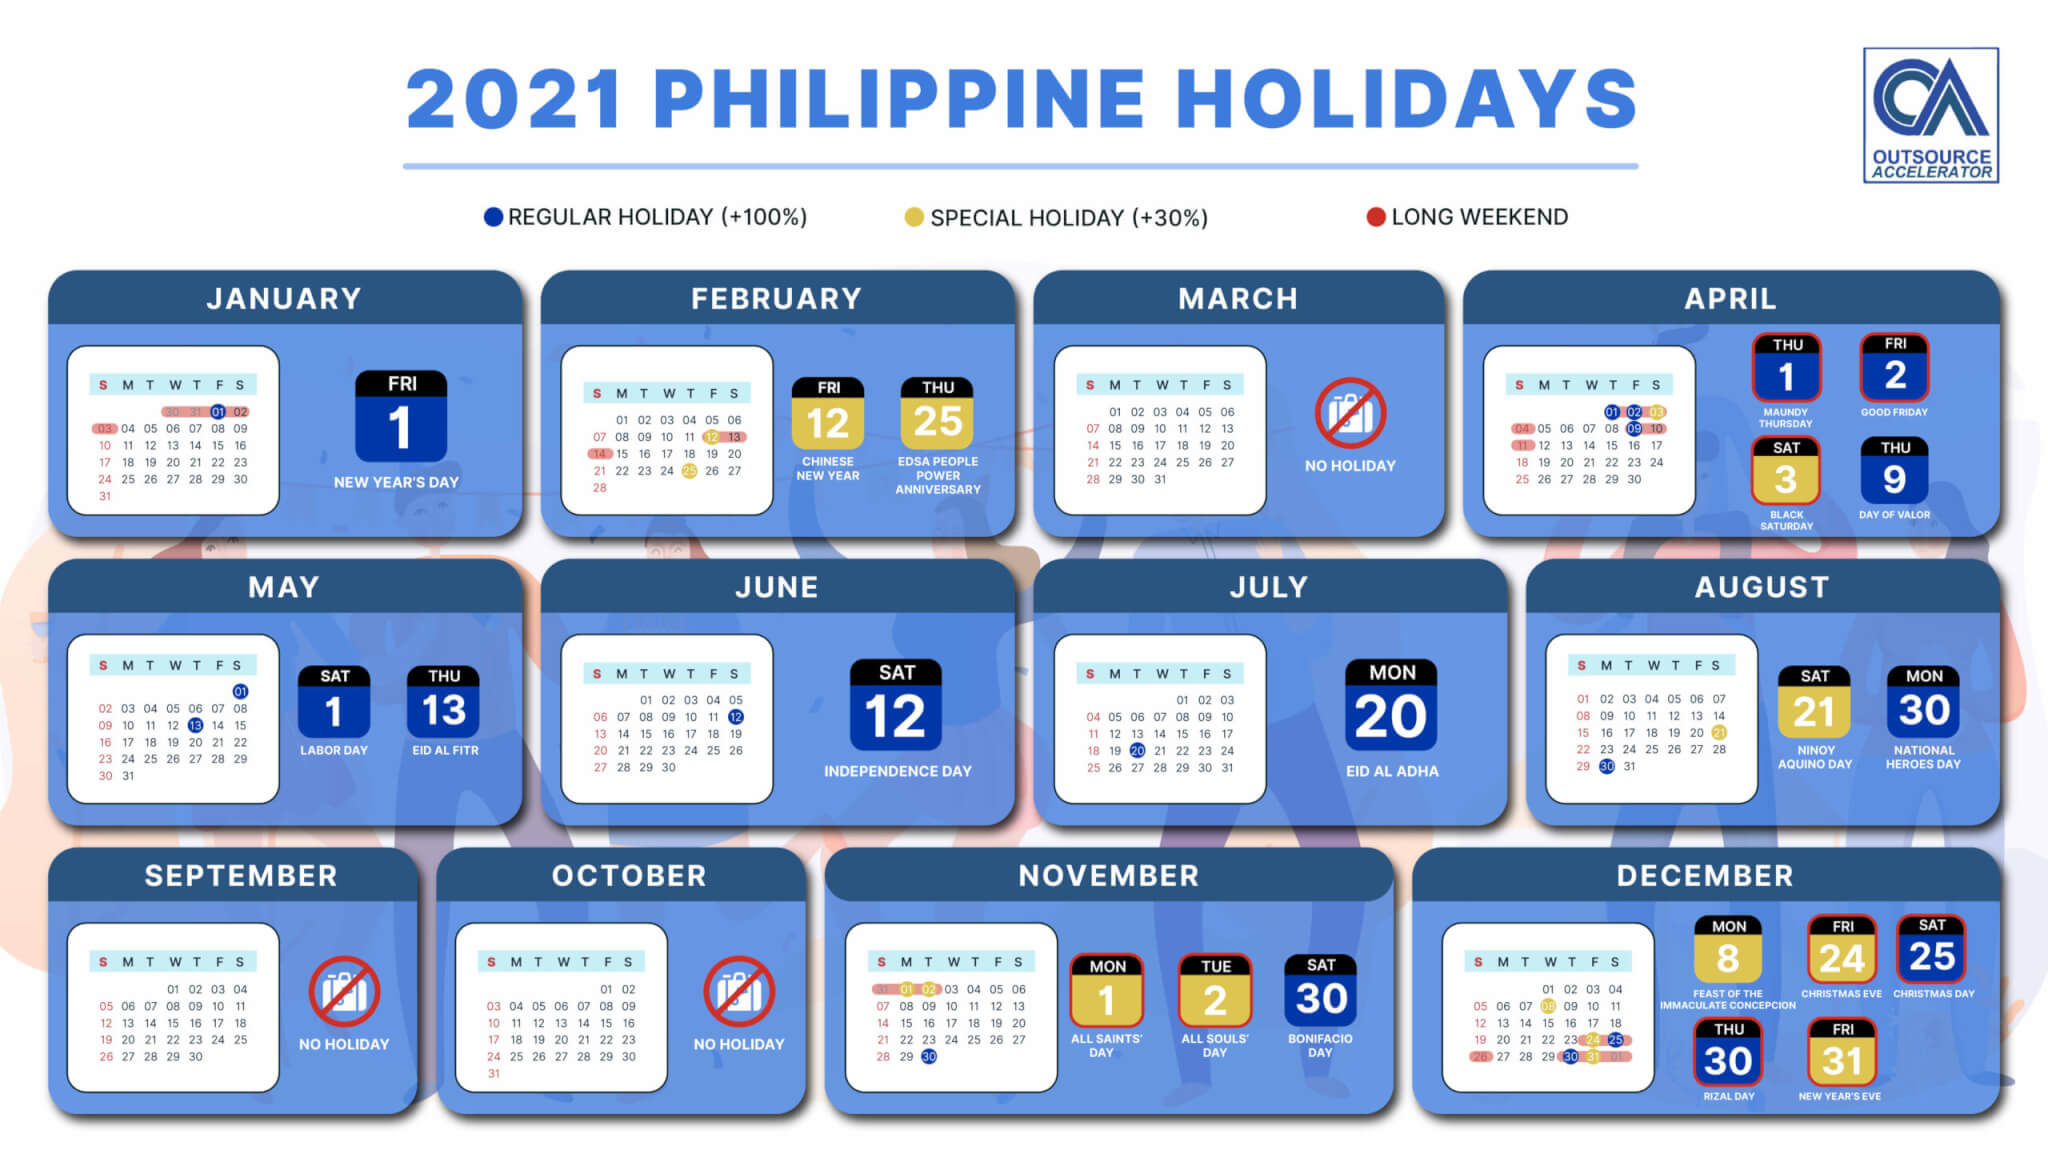 philippine-holidays-2021-outsource-accelerator